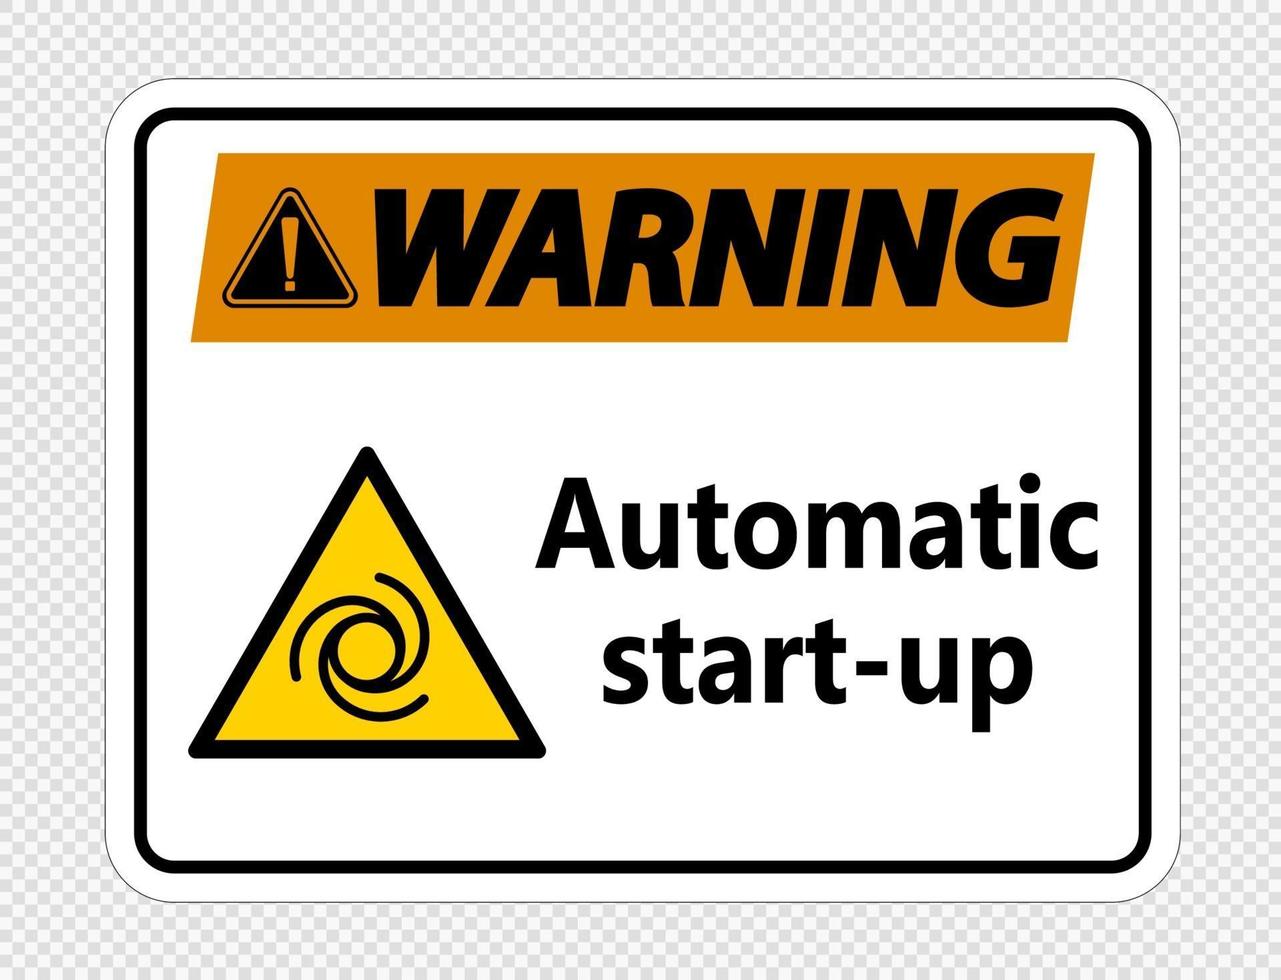 Warning automatic start up sign on transparent background vector